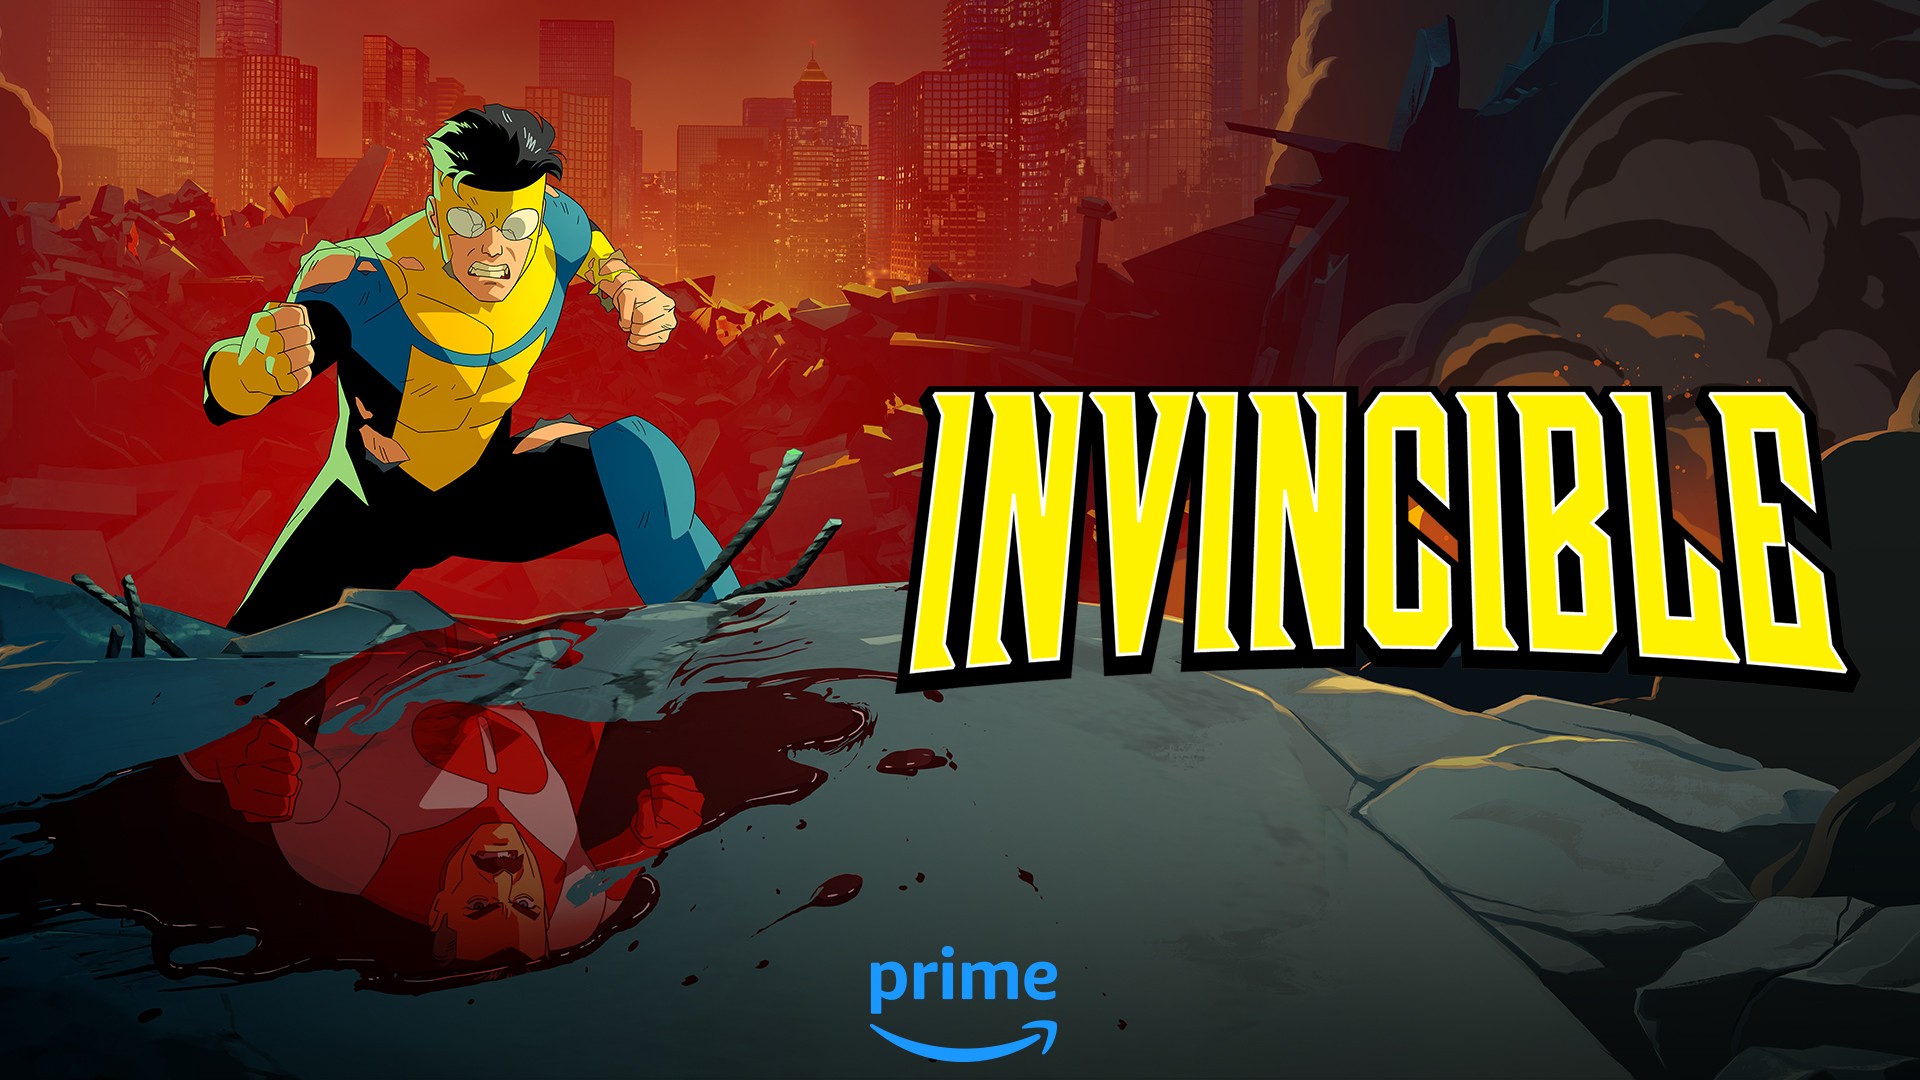 Was checking IMDB and stumbled upon this for Season 2 : r/Invincible